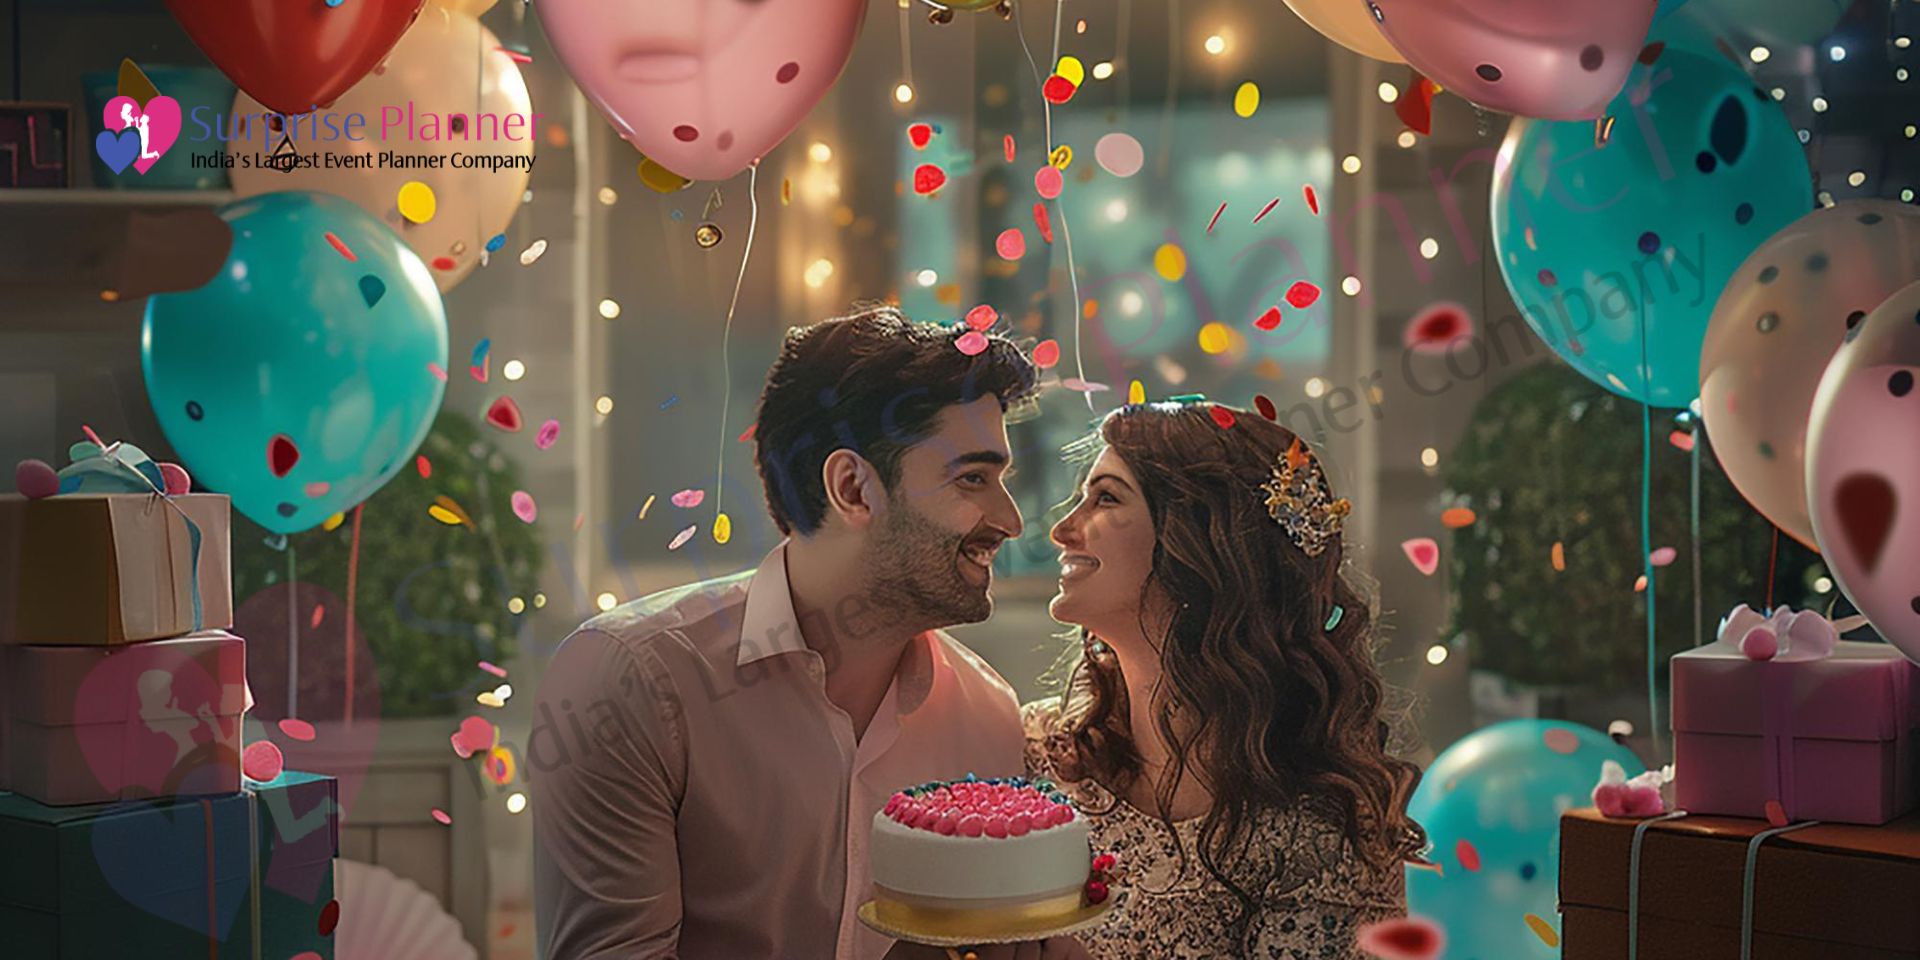 Top 10 Birthday Celebration Ideas To Make It Extra Special For Your Love